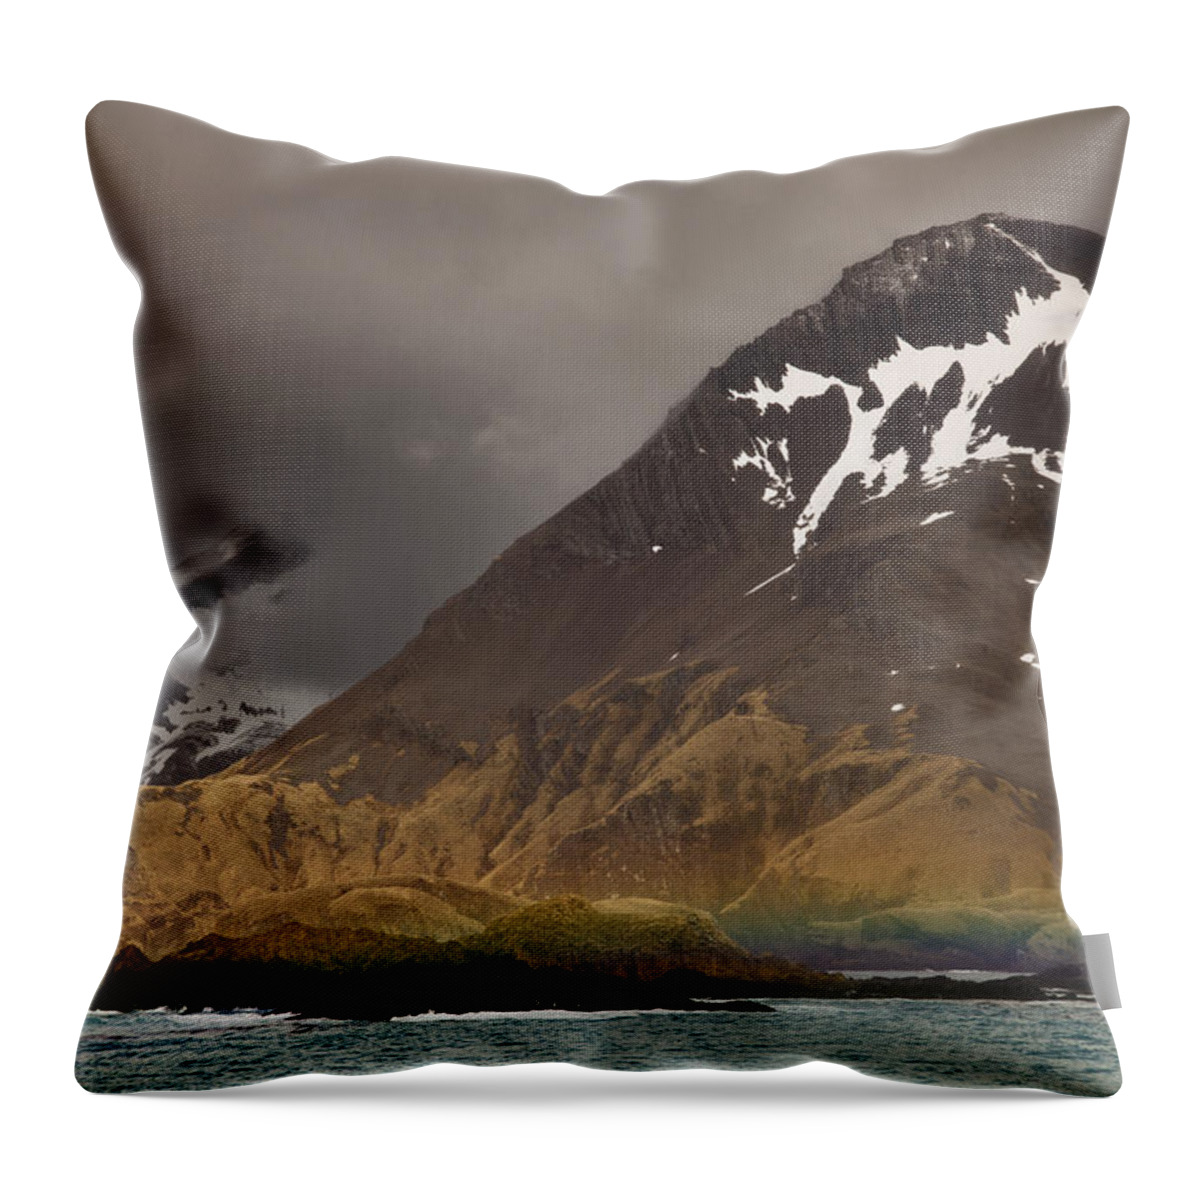 00479612 Throw Pillow featuring the photograph Rainbow At Entrance To Fortuna Bay by Colin Monteath